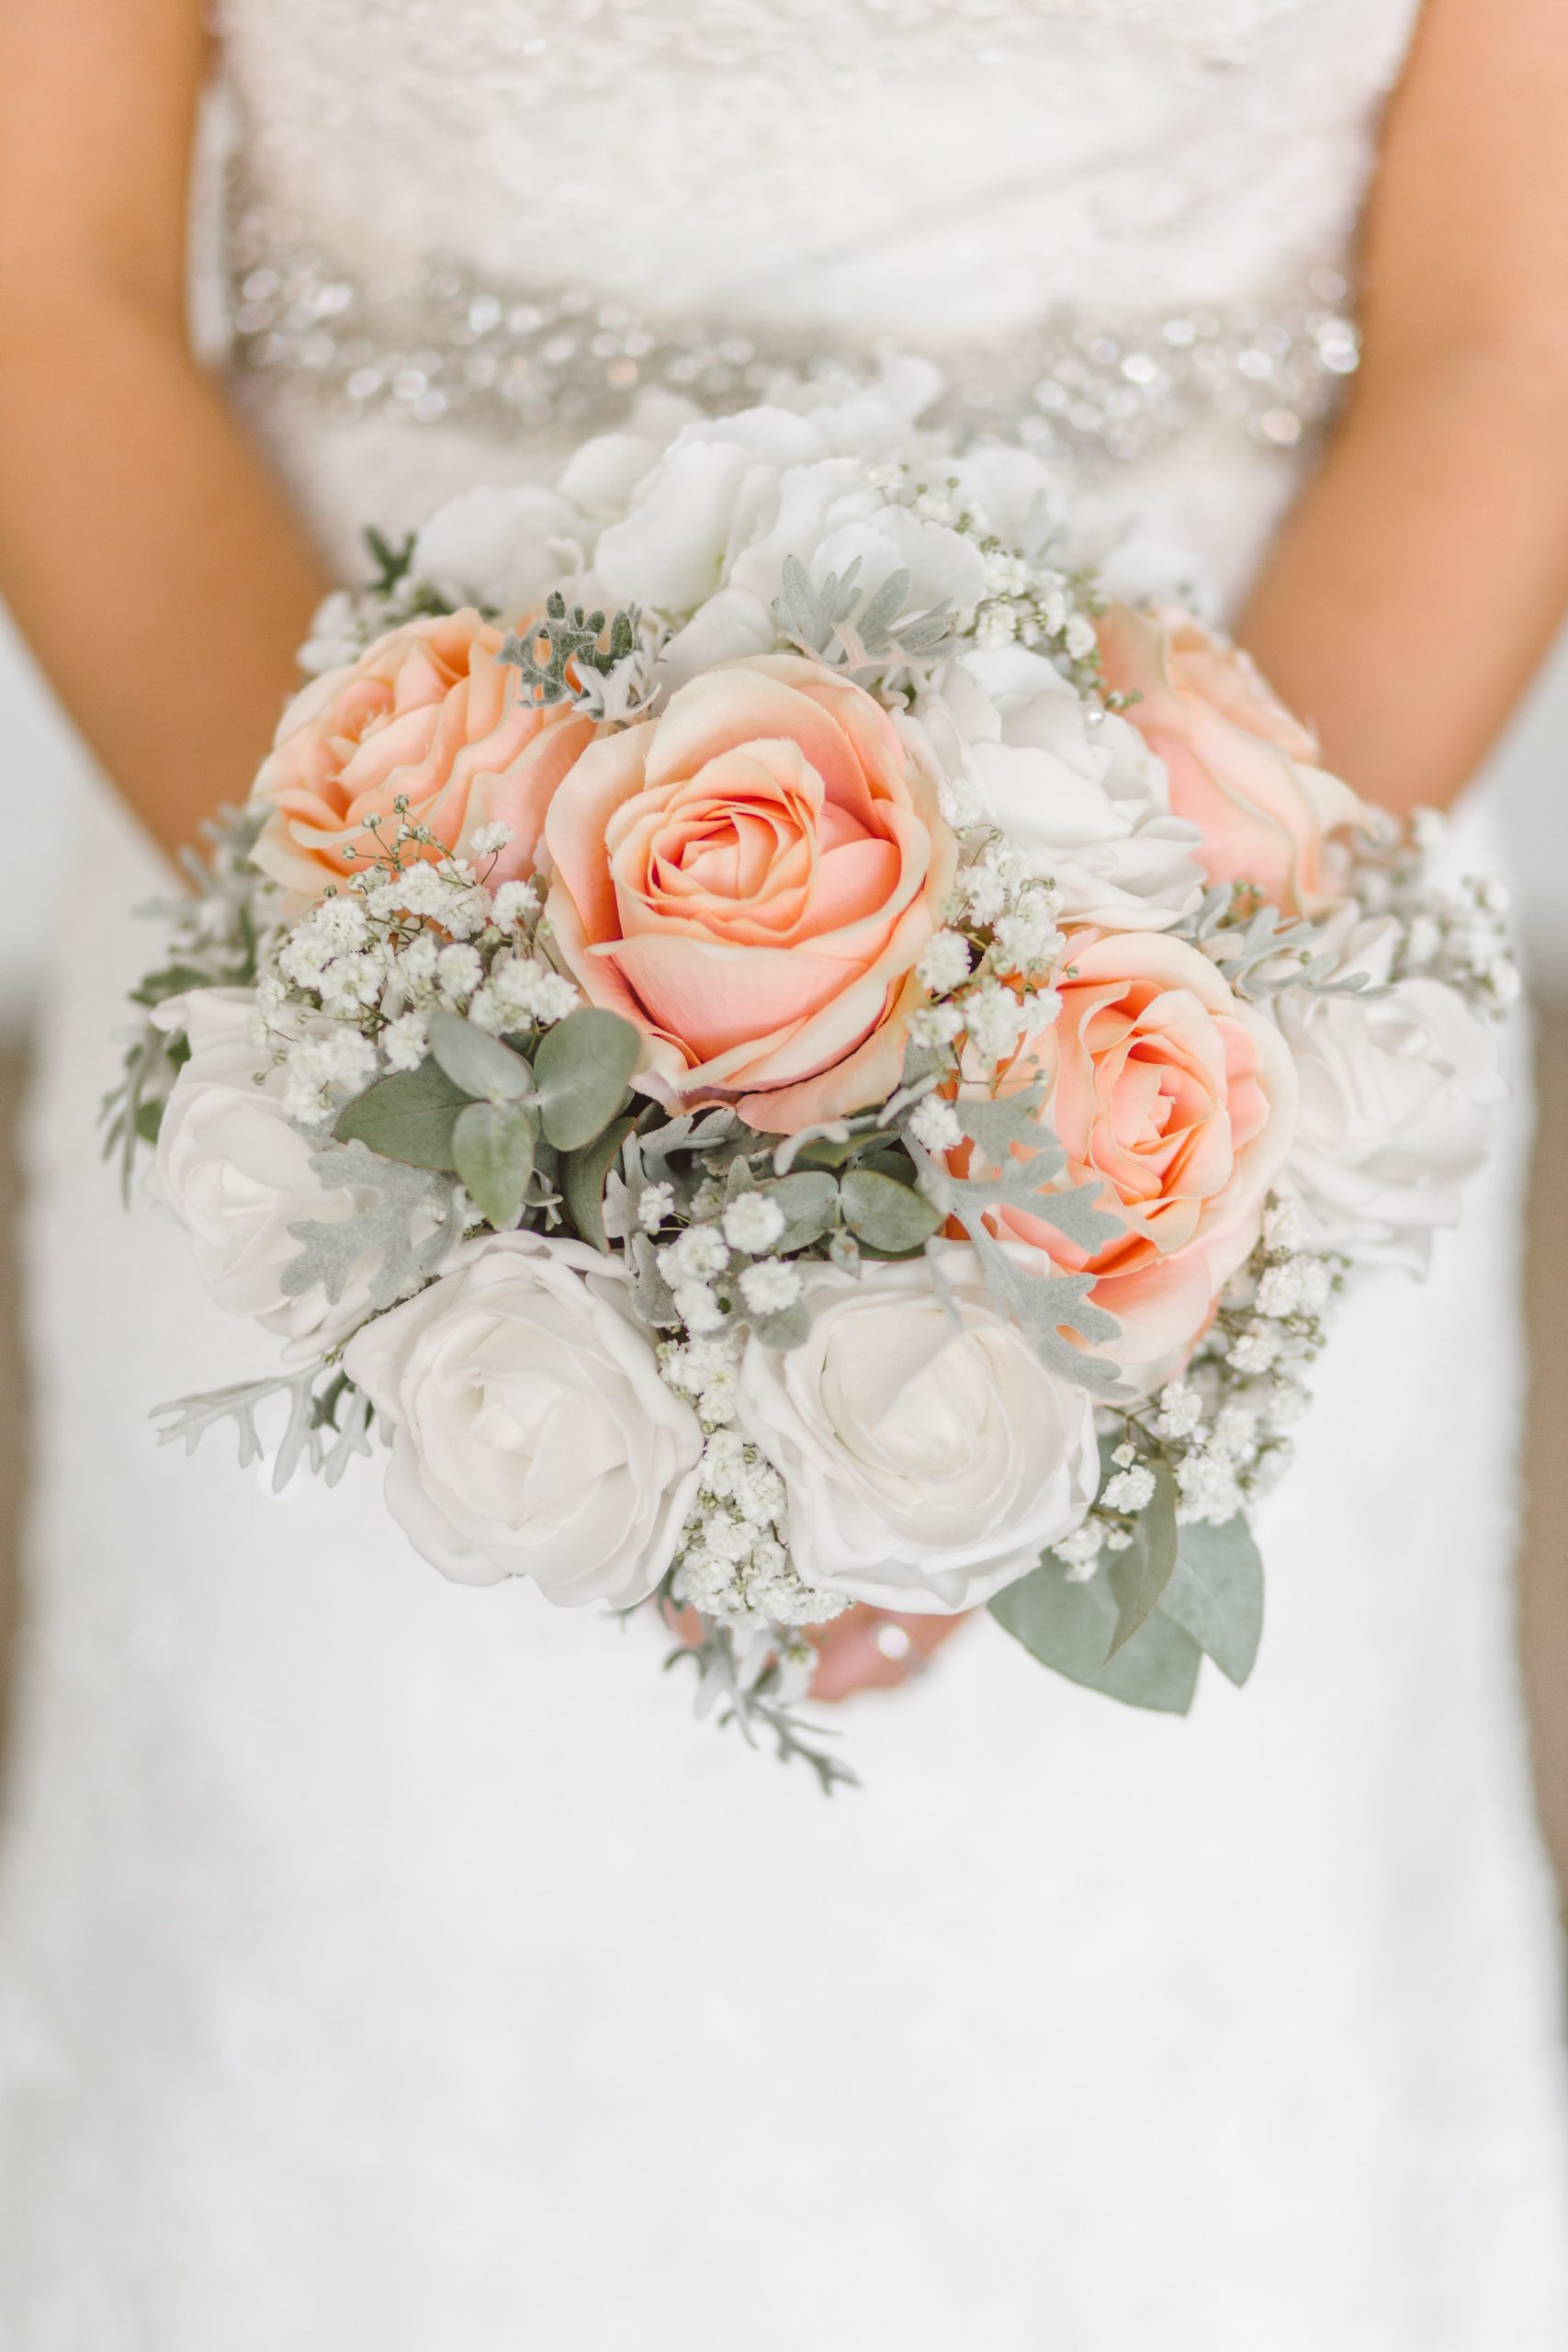 Why Dried Wedding Flowers Make The Coolest Wedding Décor - hitched